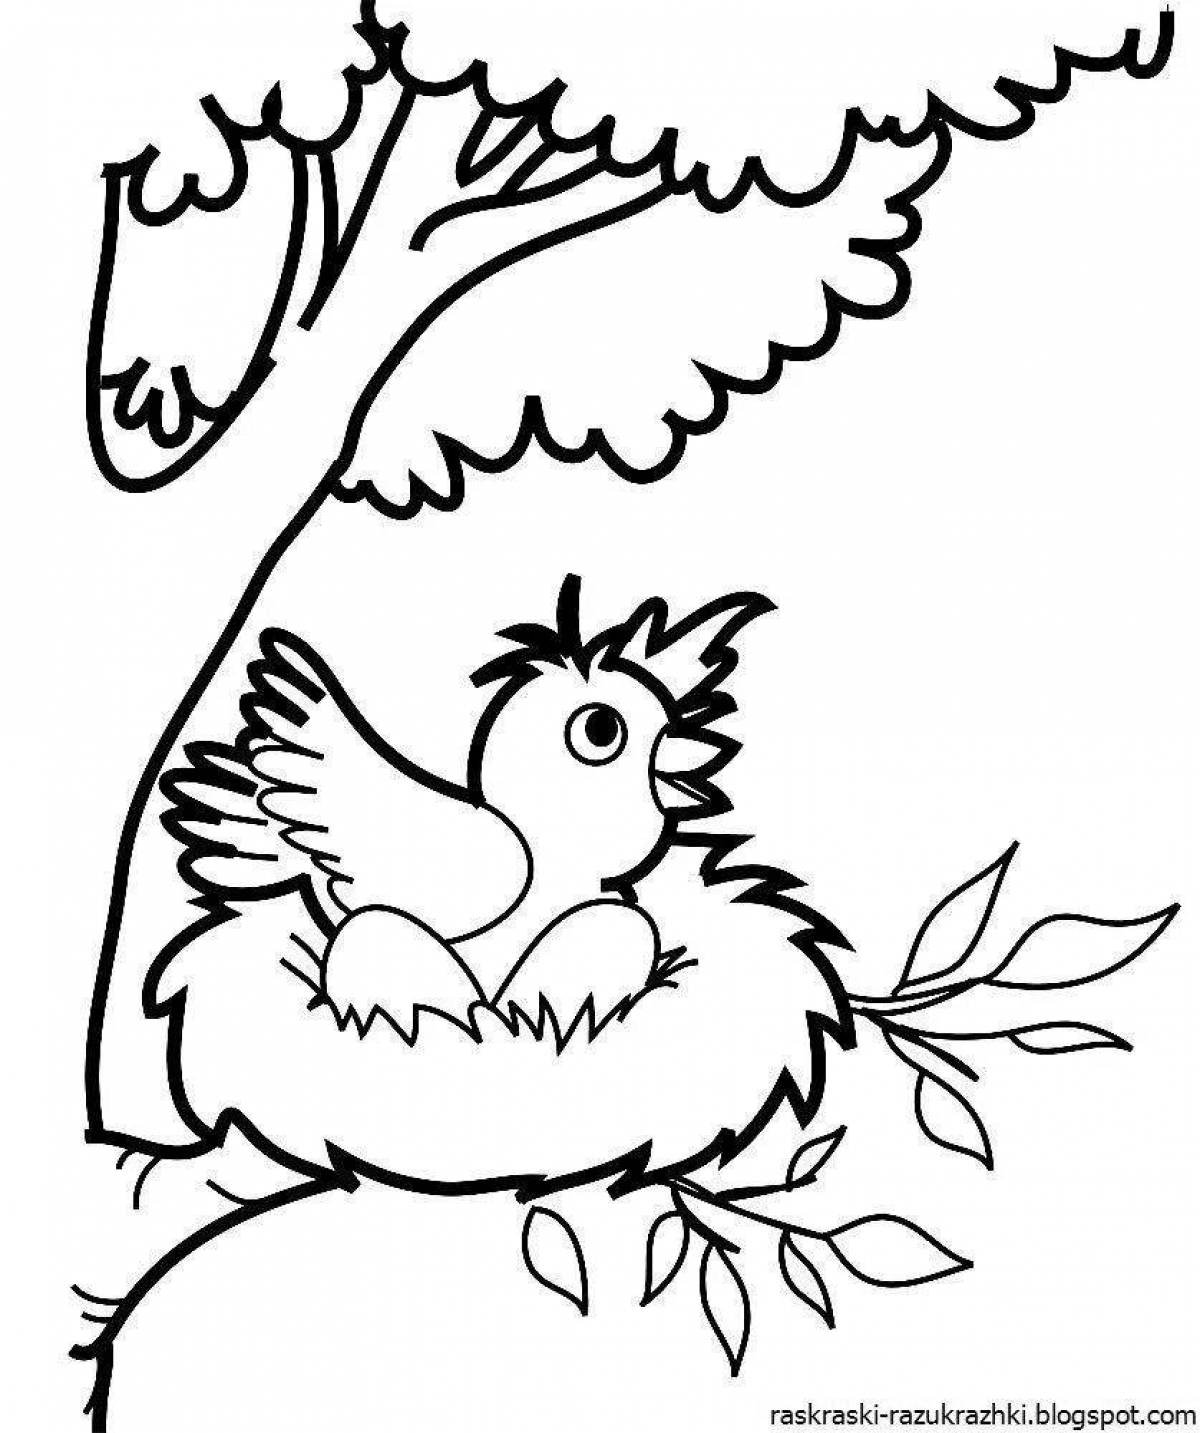 Fun coloring book with birds for 4-5 year olds